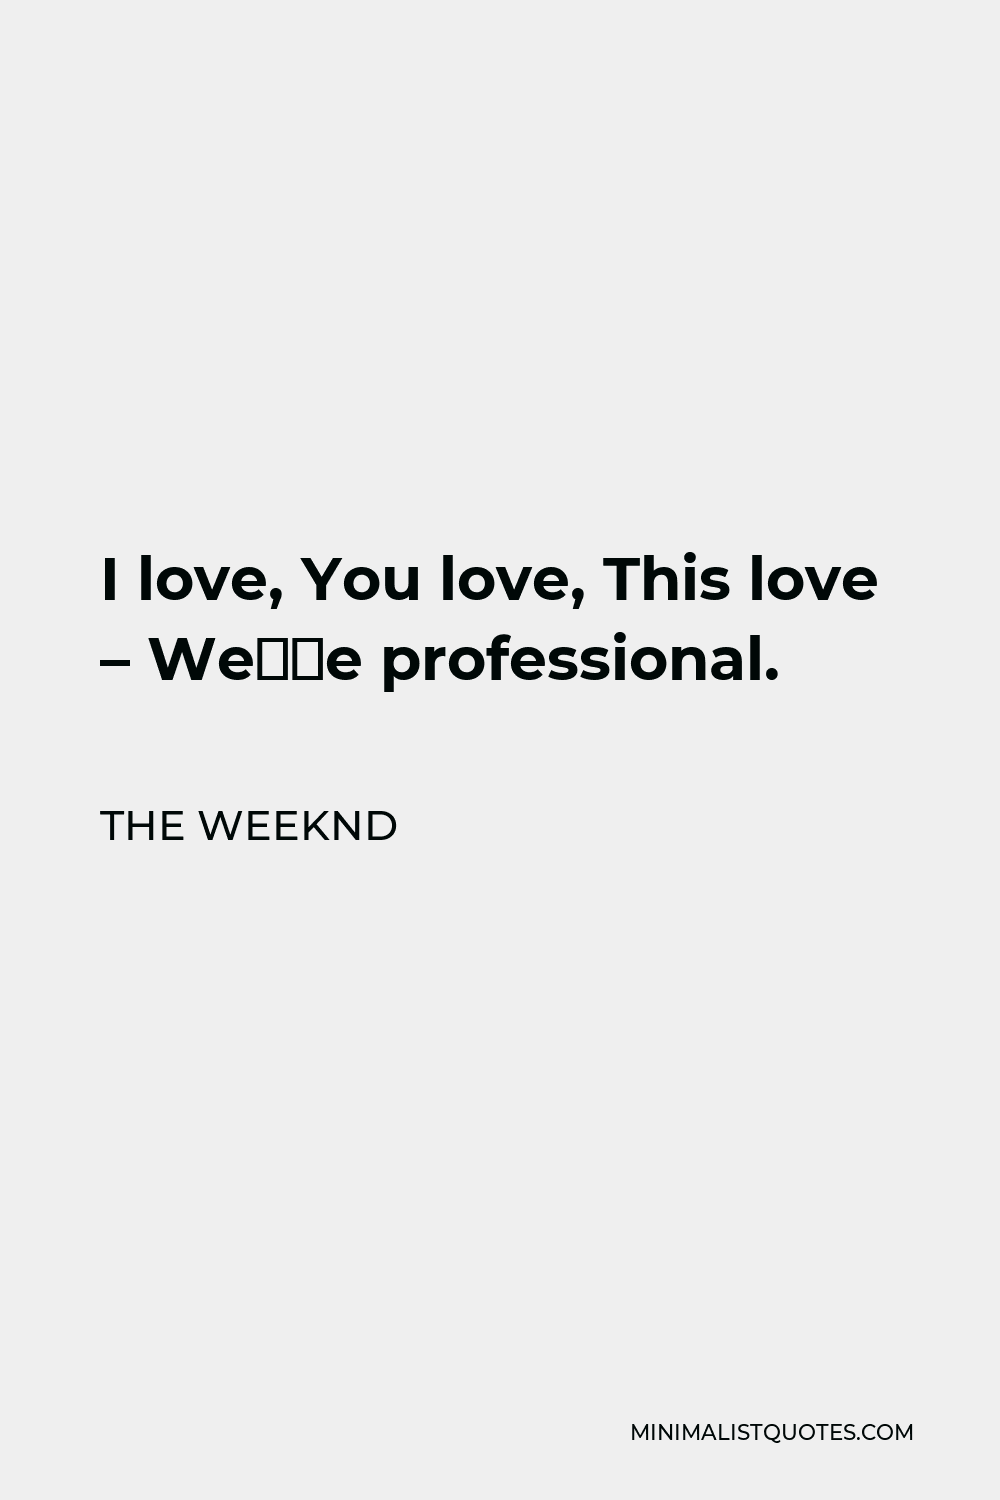 The Weeknd Quote - I love, You love, This love – We’re professional.